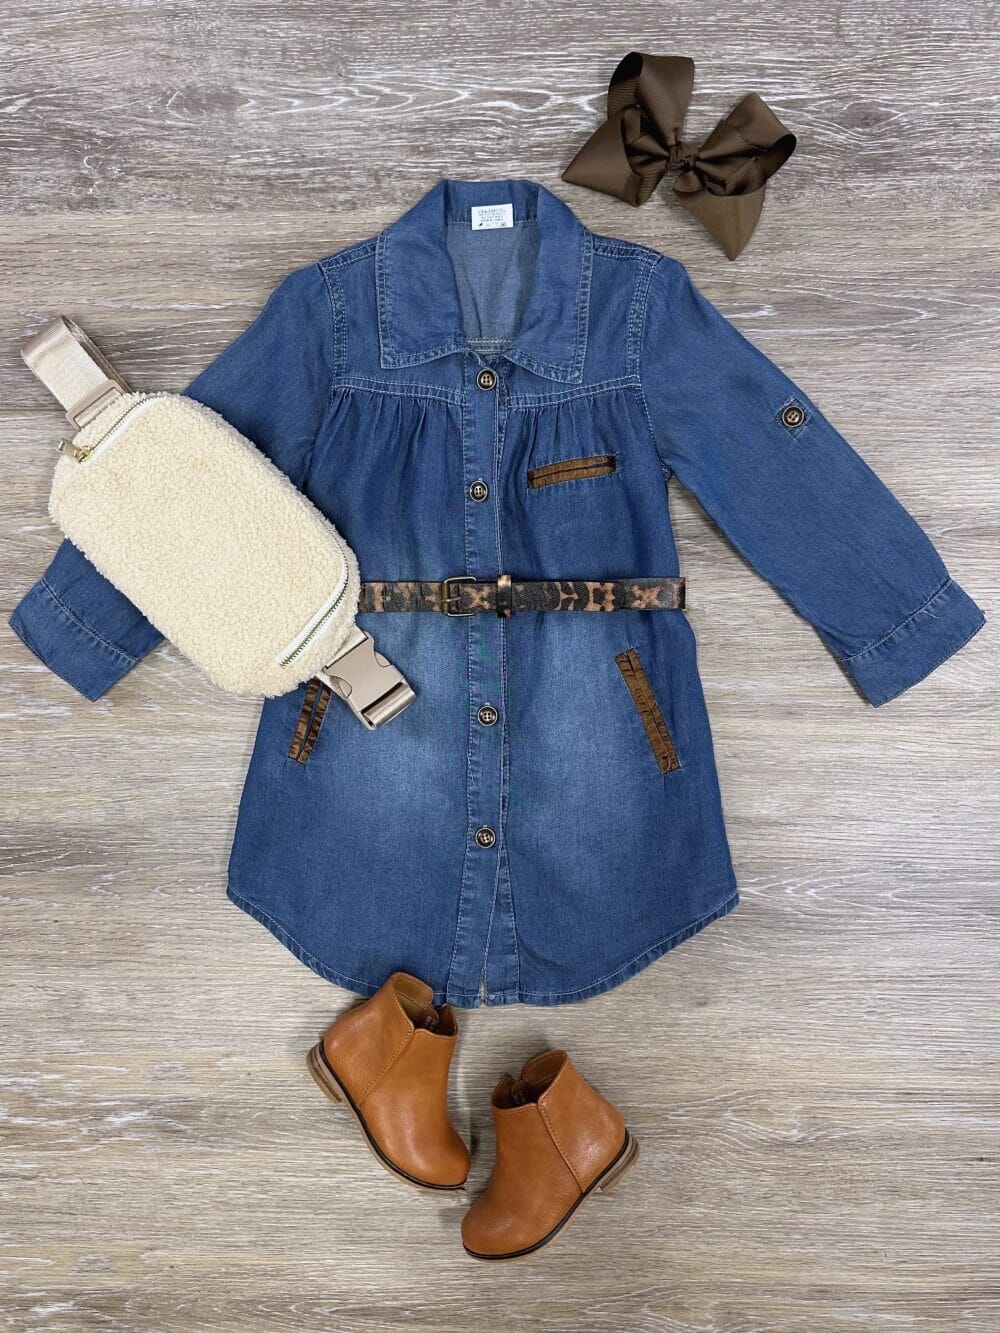 Infant Girl Denim Dress With Pockets Long Sleeve Boys Long Sleeve Shirts  And Loose Shirt For Fashionable Ladies Sizes 2 7T Brand New Y0726 From  Mengqiqi07, $10.79 | DHgate.Com